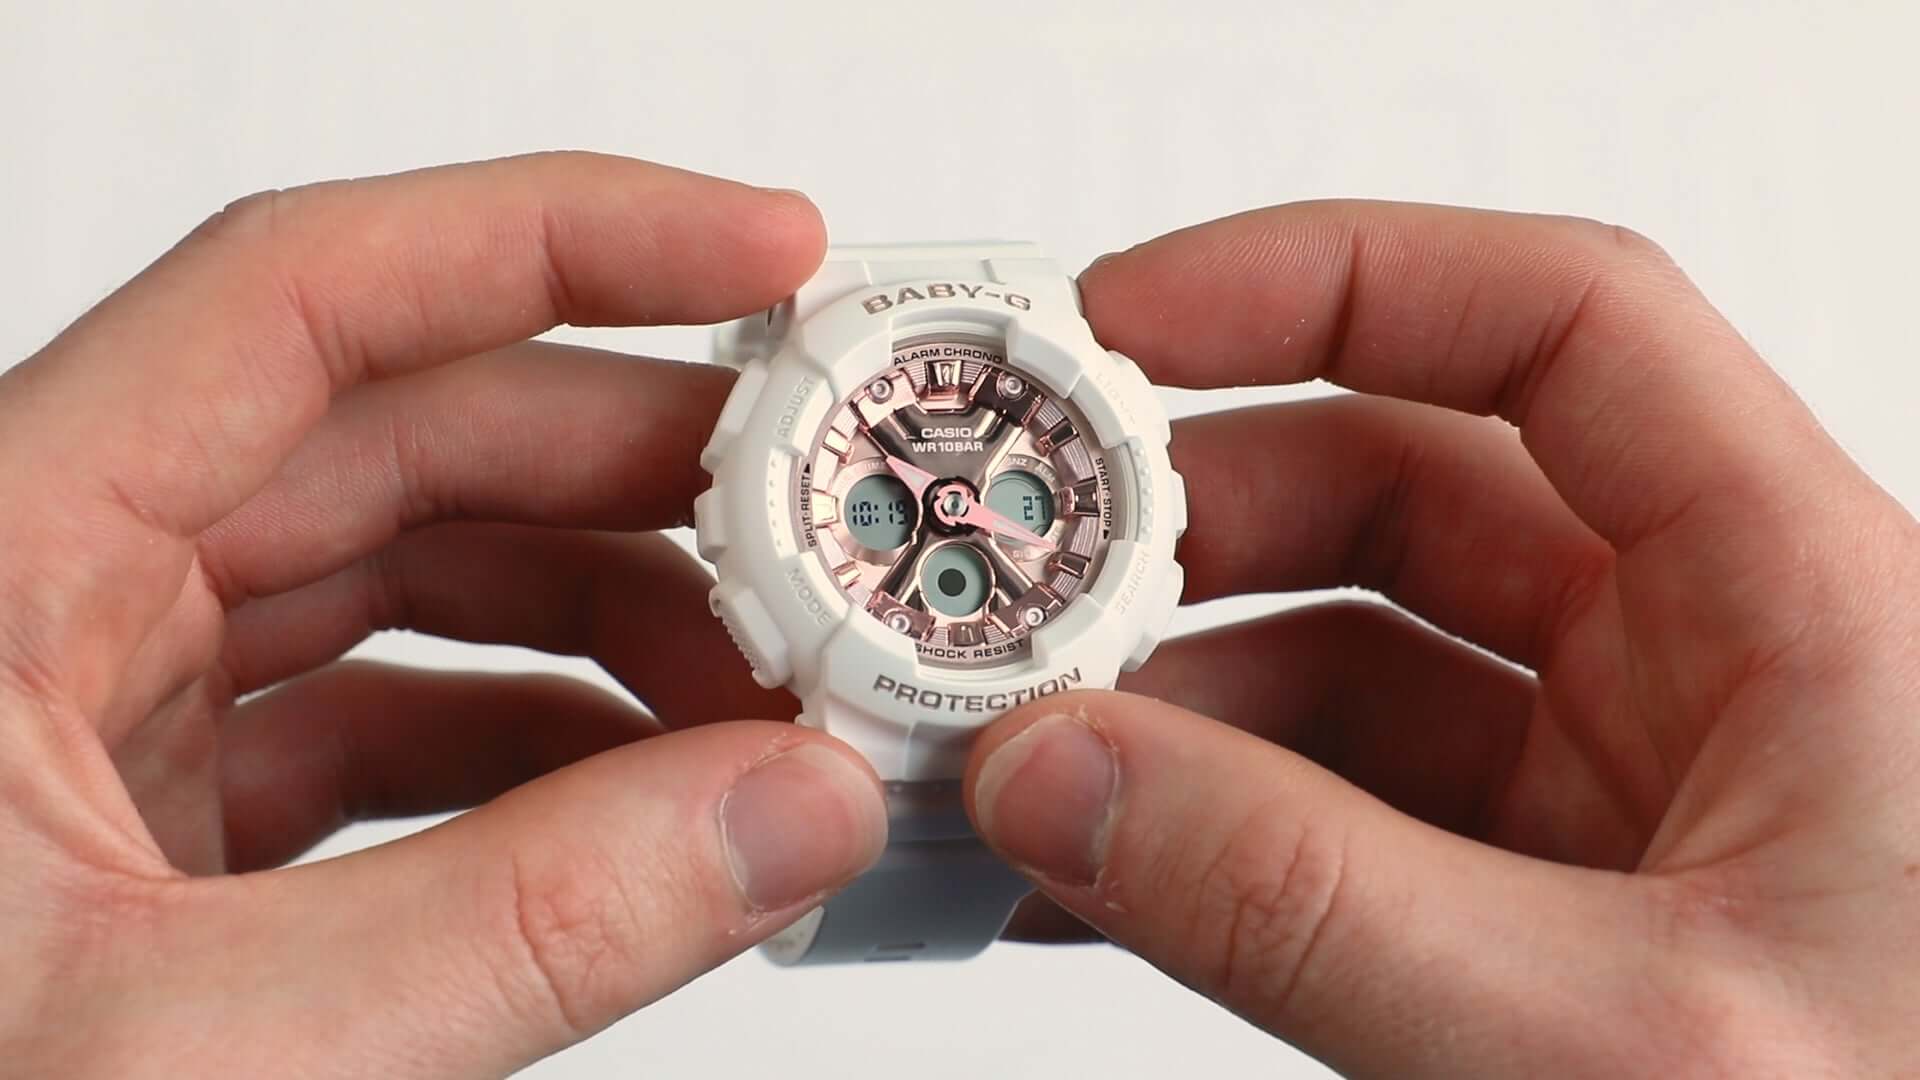 How To Change Time On Baby-G Watches